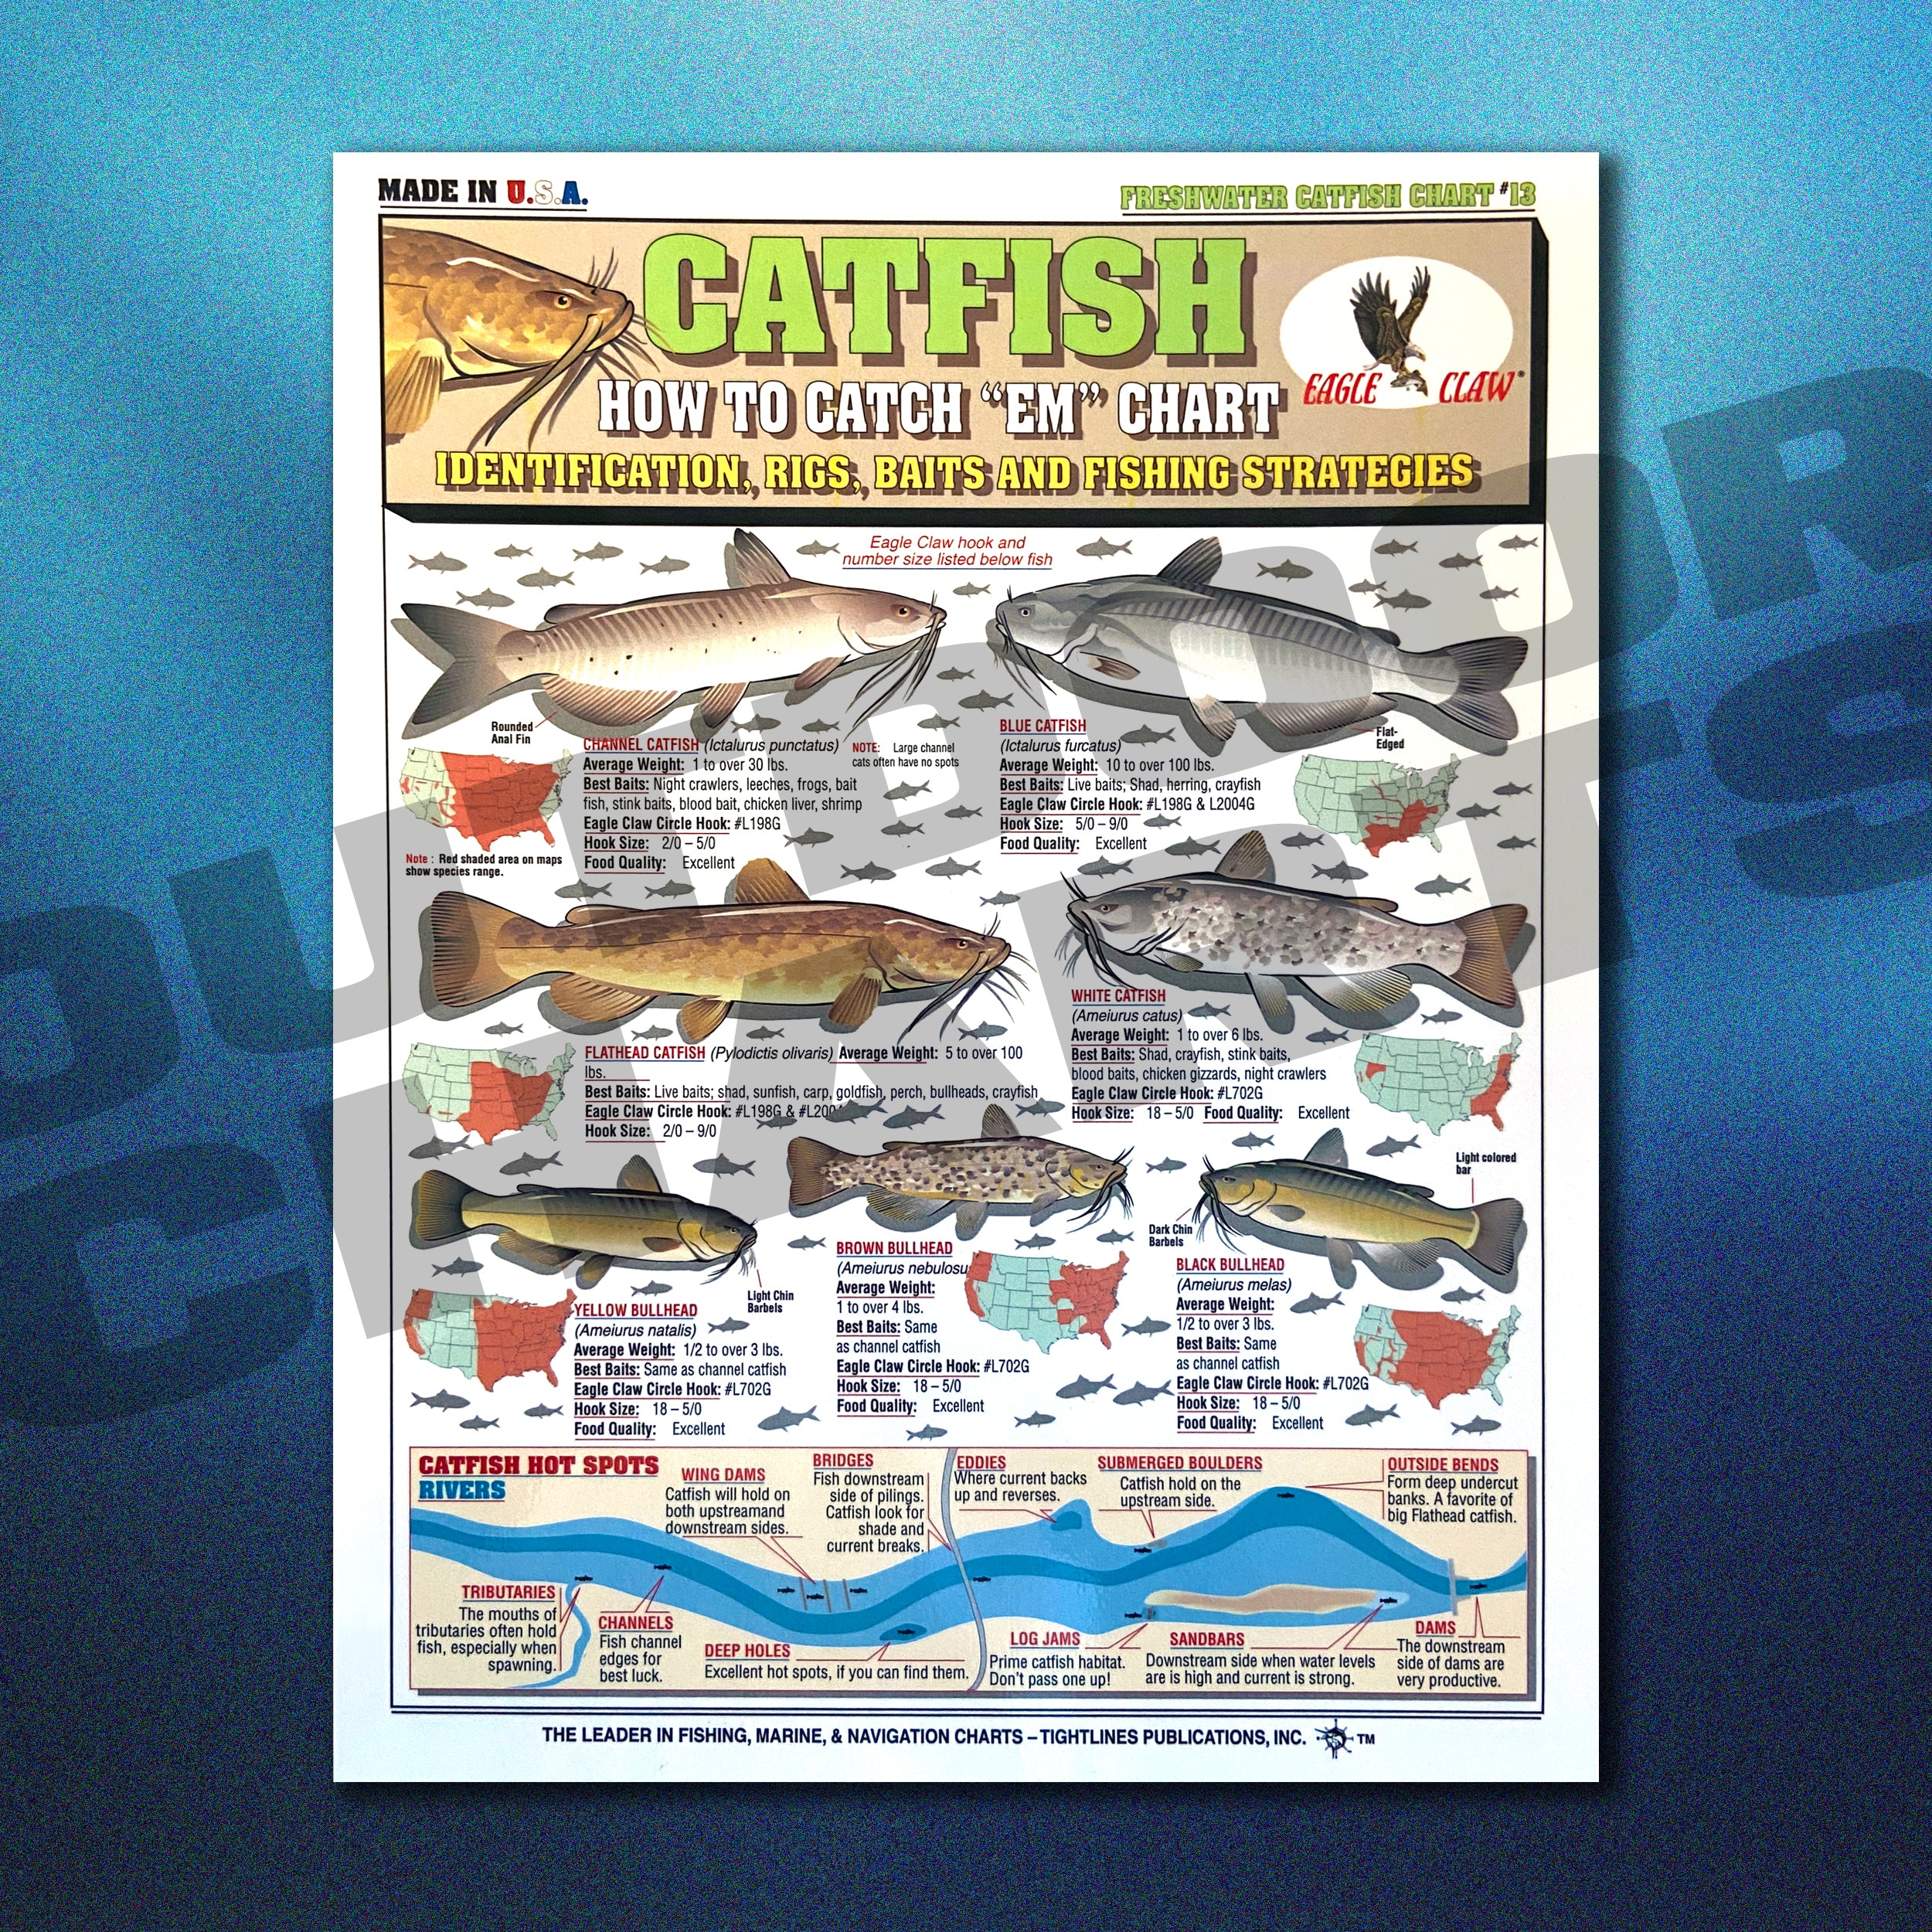 How to Catch 'Em Catfish Chart #13 (Identification, Rigs